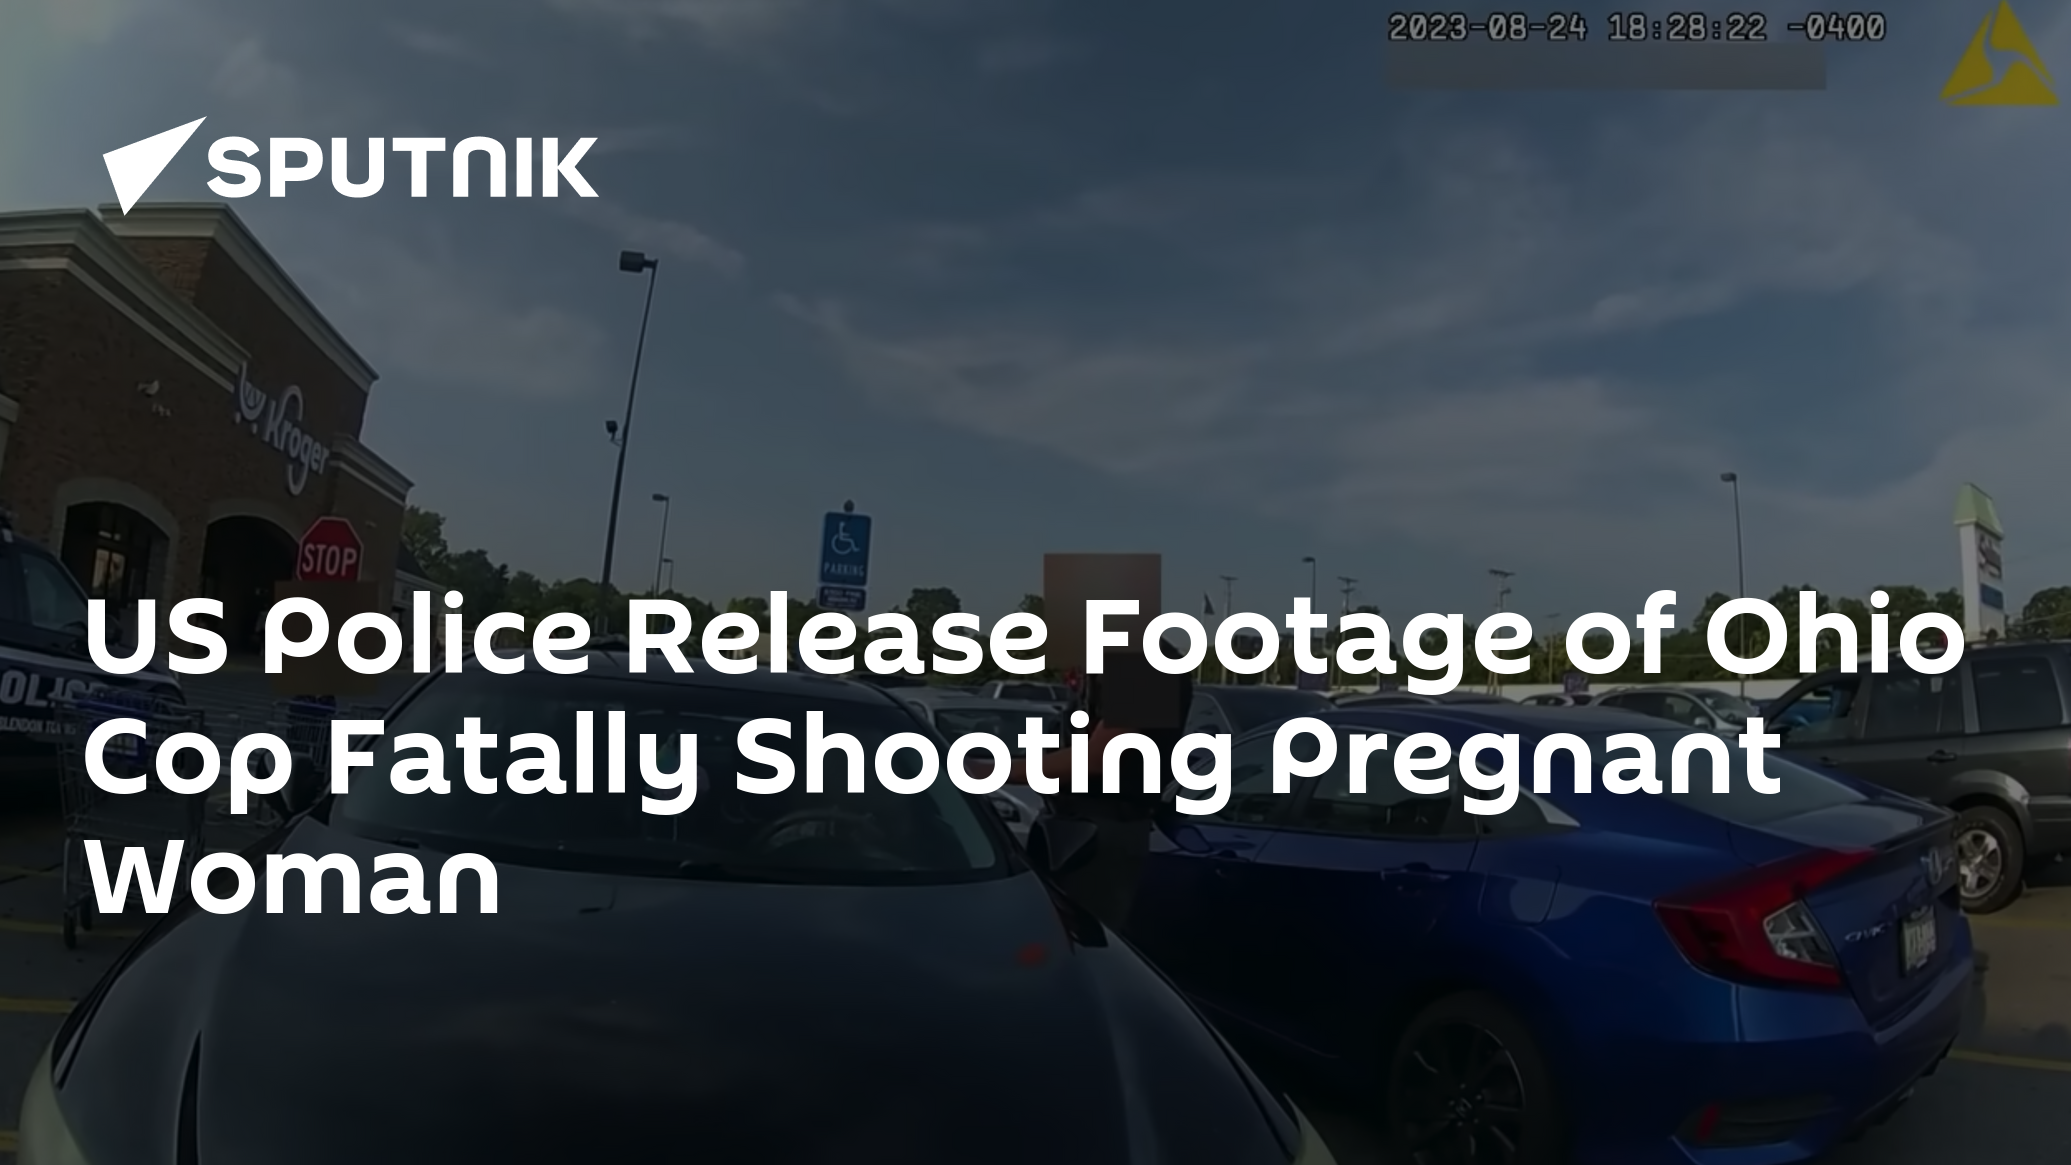 US Police Release Footage of Ohio Cop Fatally Shooting Pregnant Woman